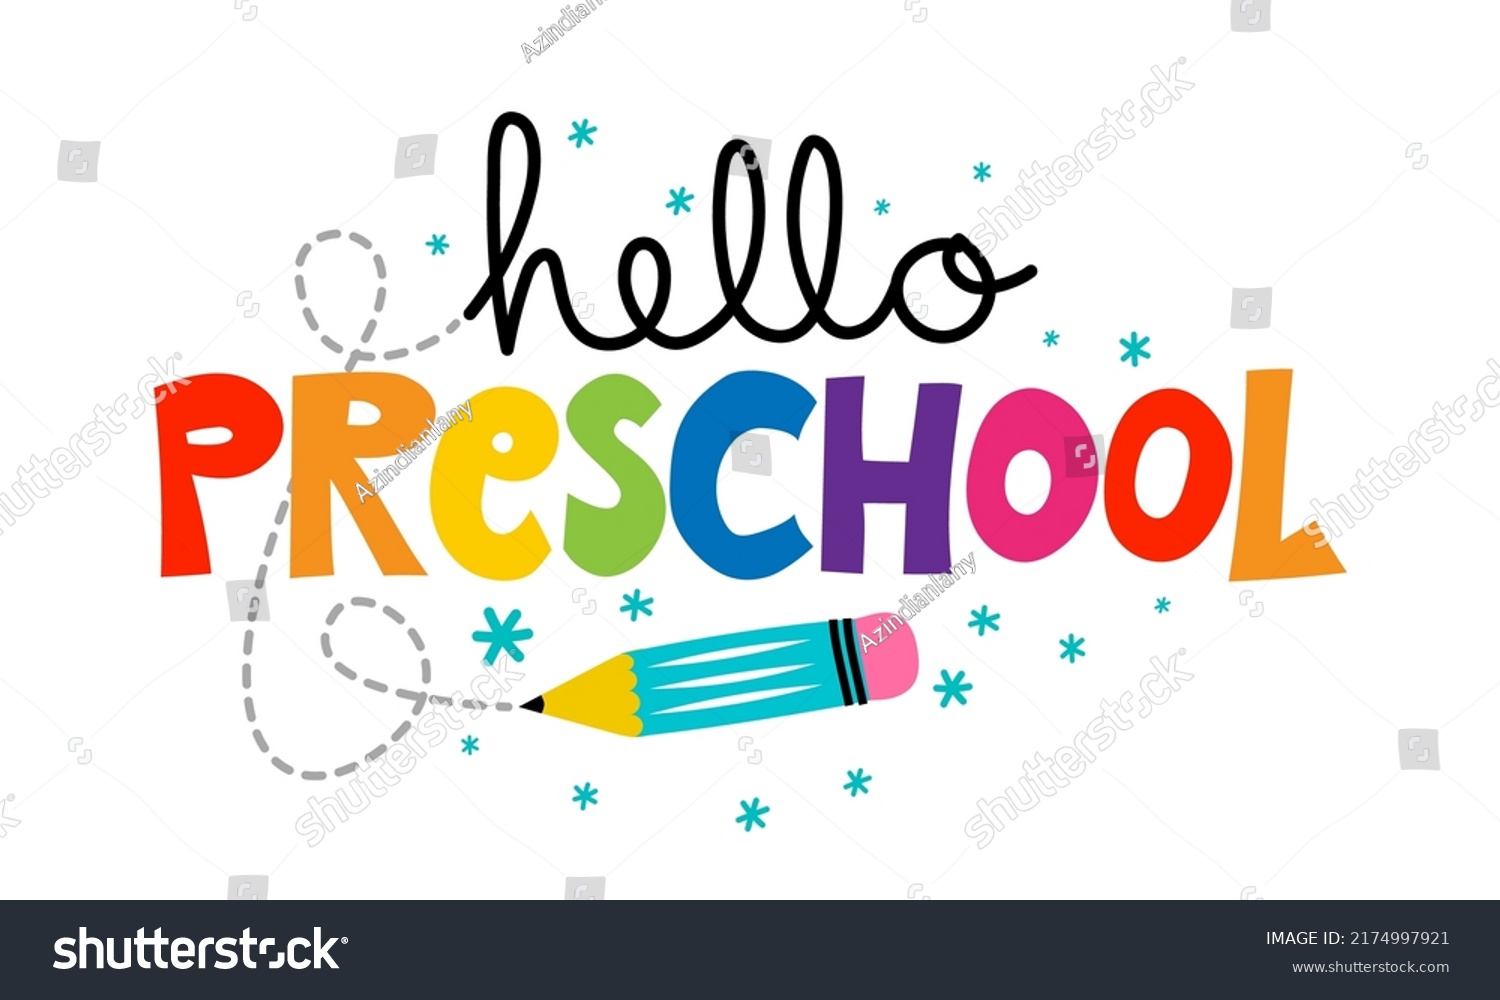 SVG of Hello Preschool with childish colorful pencil - typography design. Good for clothes, gift sets, photos or motivation posters. Welcome back to school sign. svg